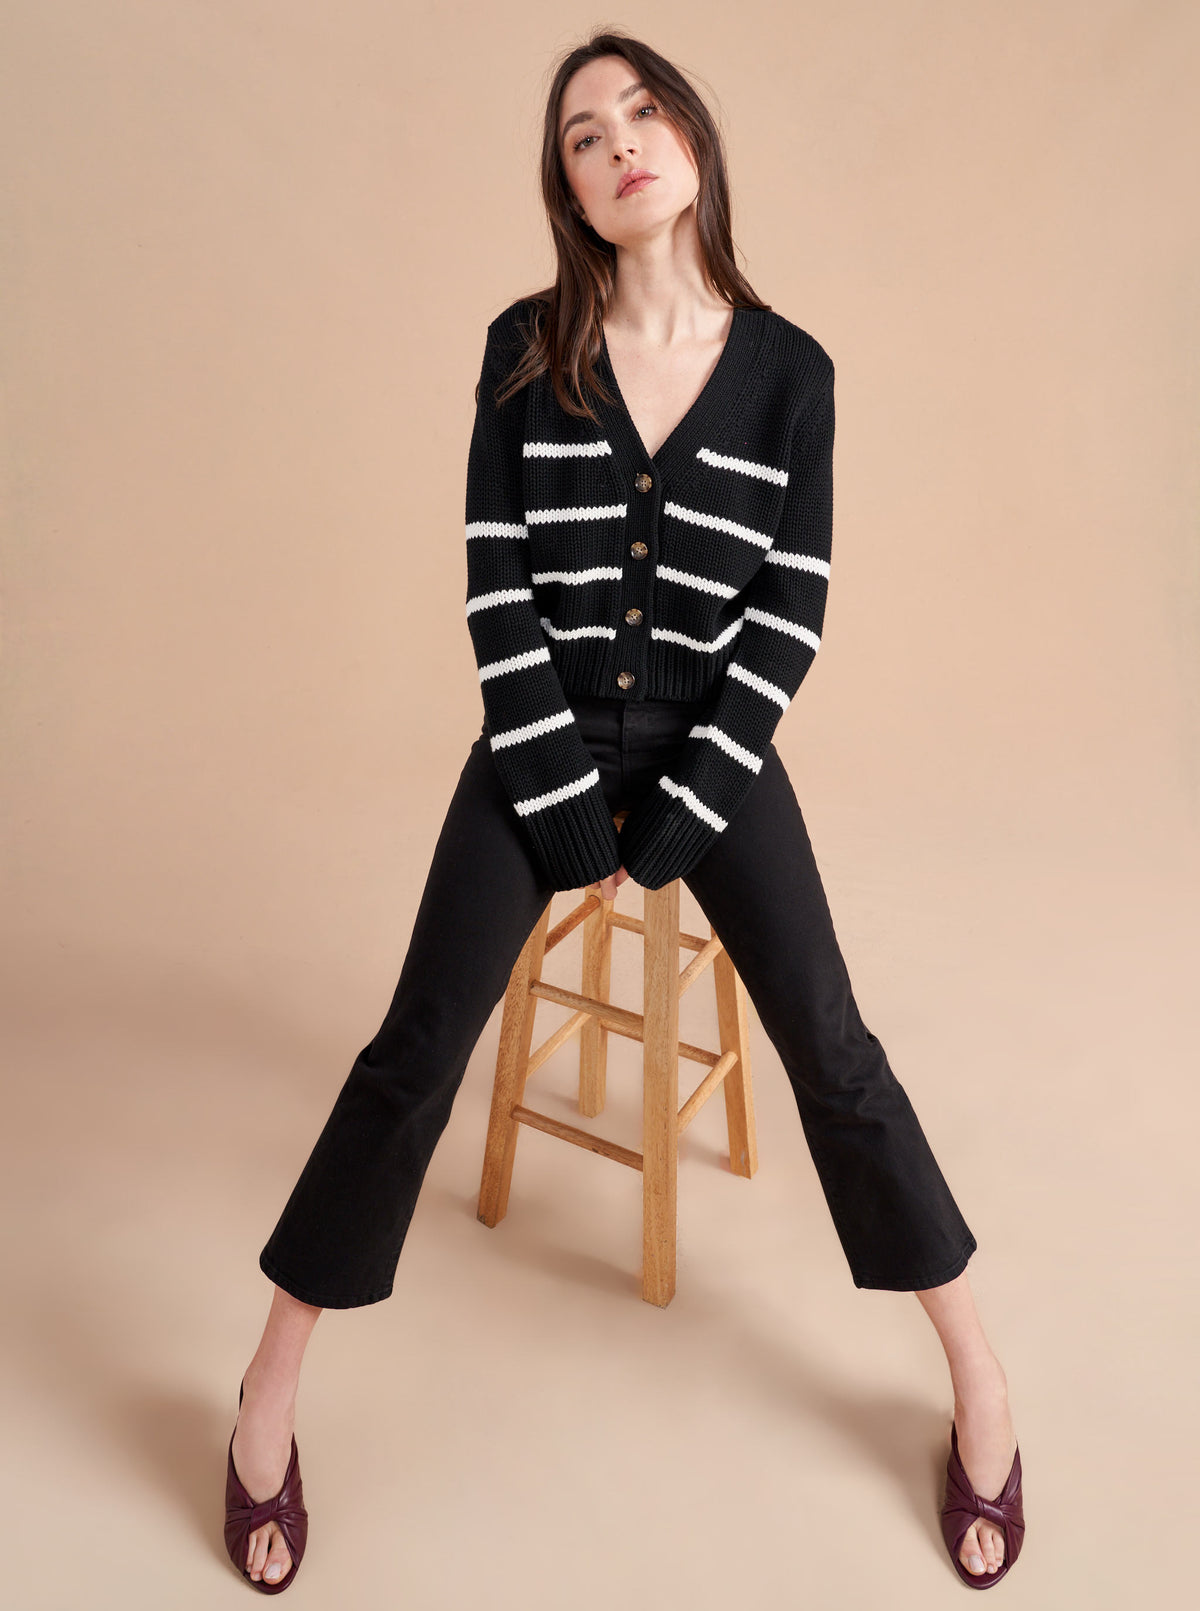 Your favorite Mini Marina Sweater now in the perfect cardigan. Our newest member of the sweater family comes in the same chunky weight you know and love us for in the perfect cropped body to wear on it's own or over your favorite dress.